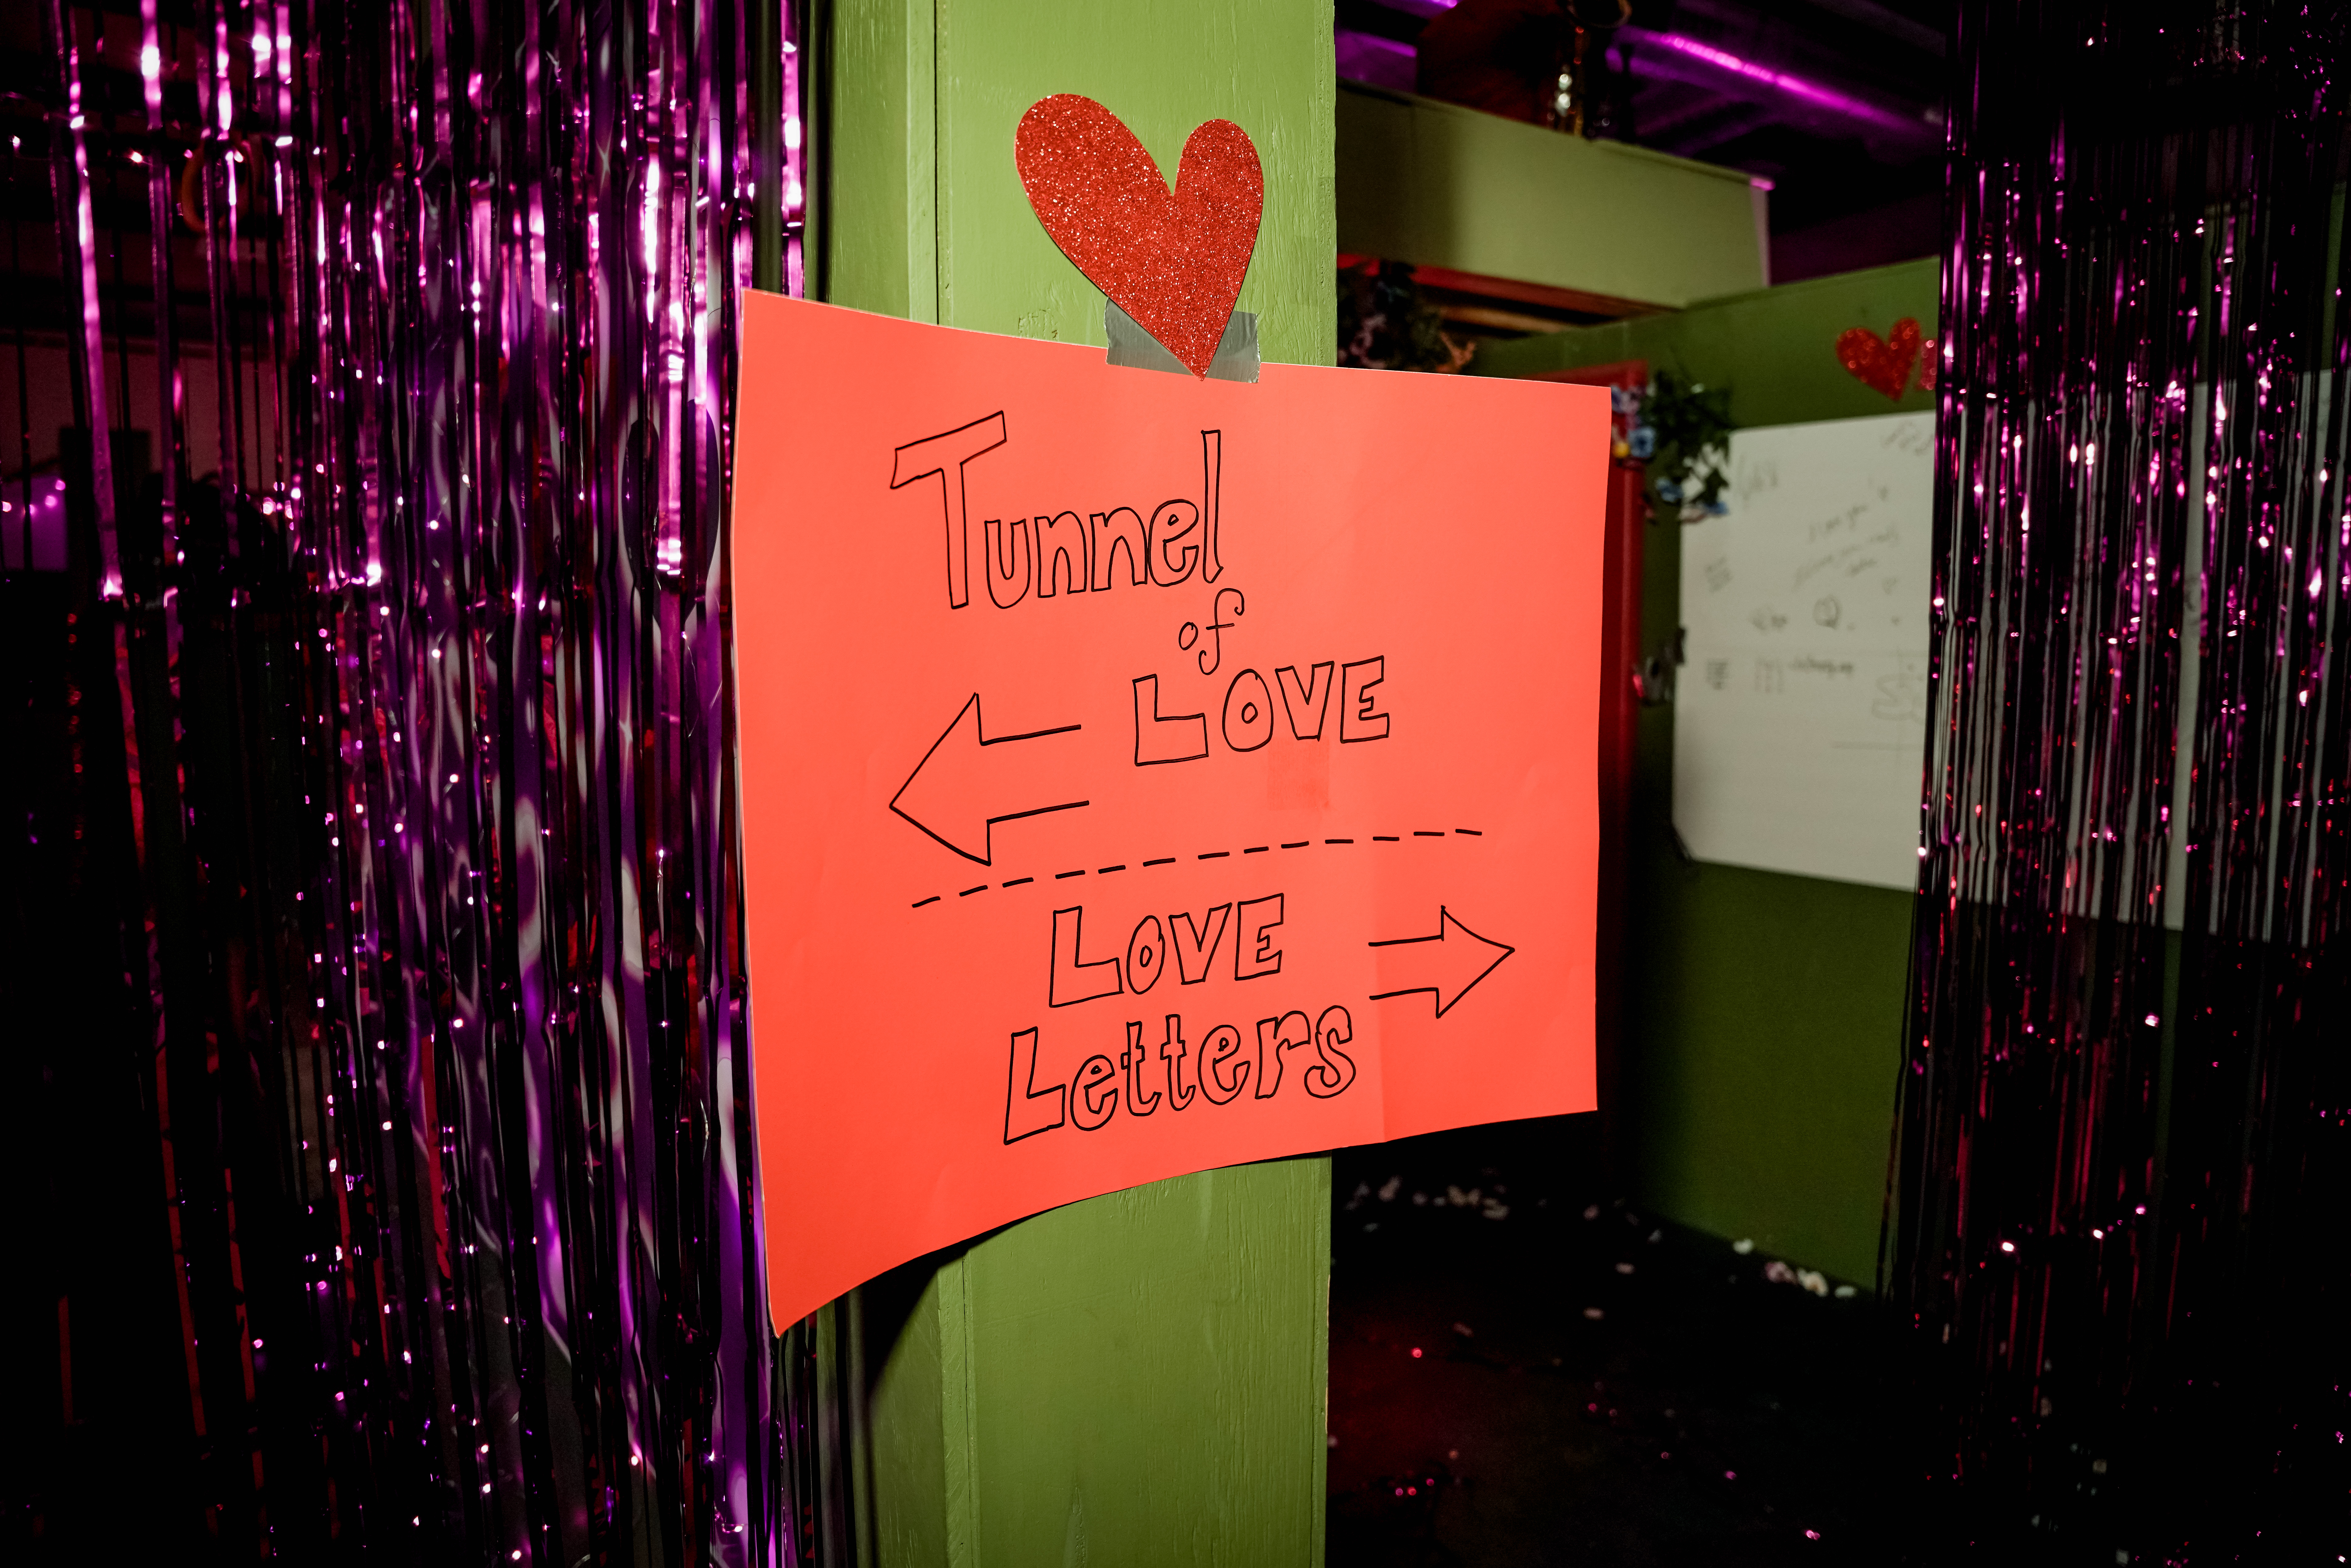 A poster up on a wall that says "tunnel of love" to the left, "love letters" to the right